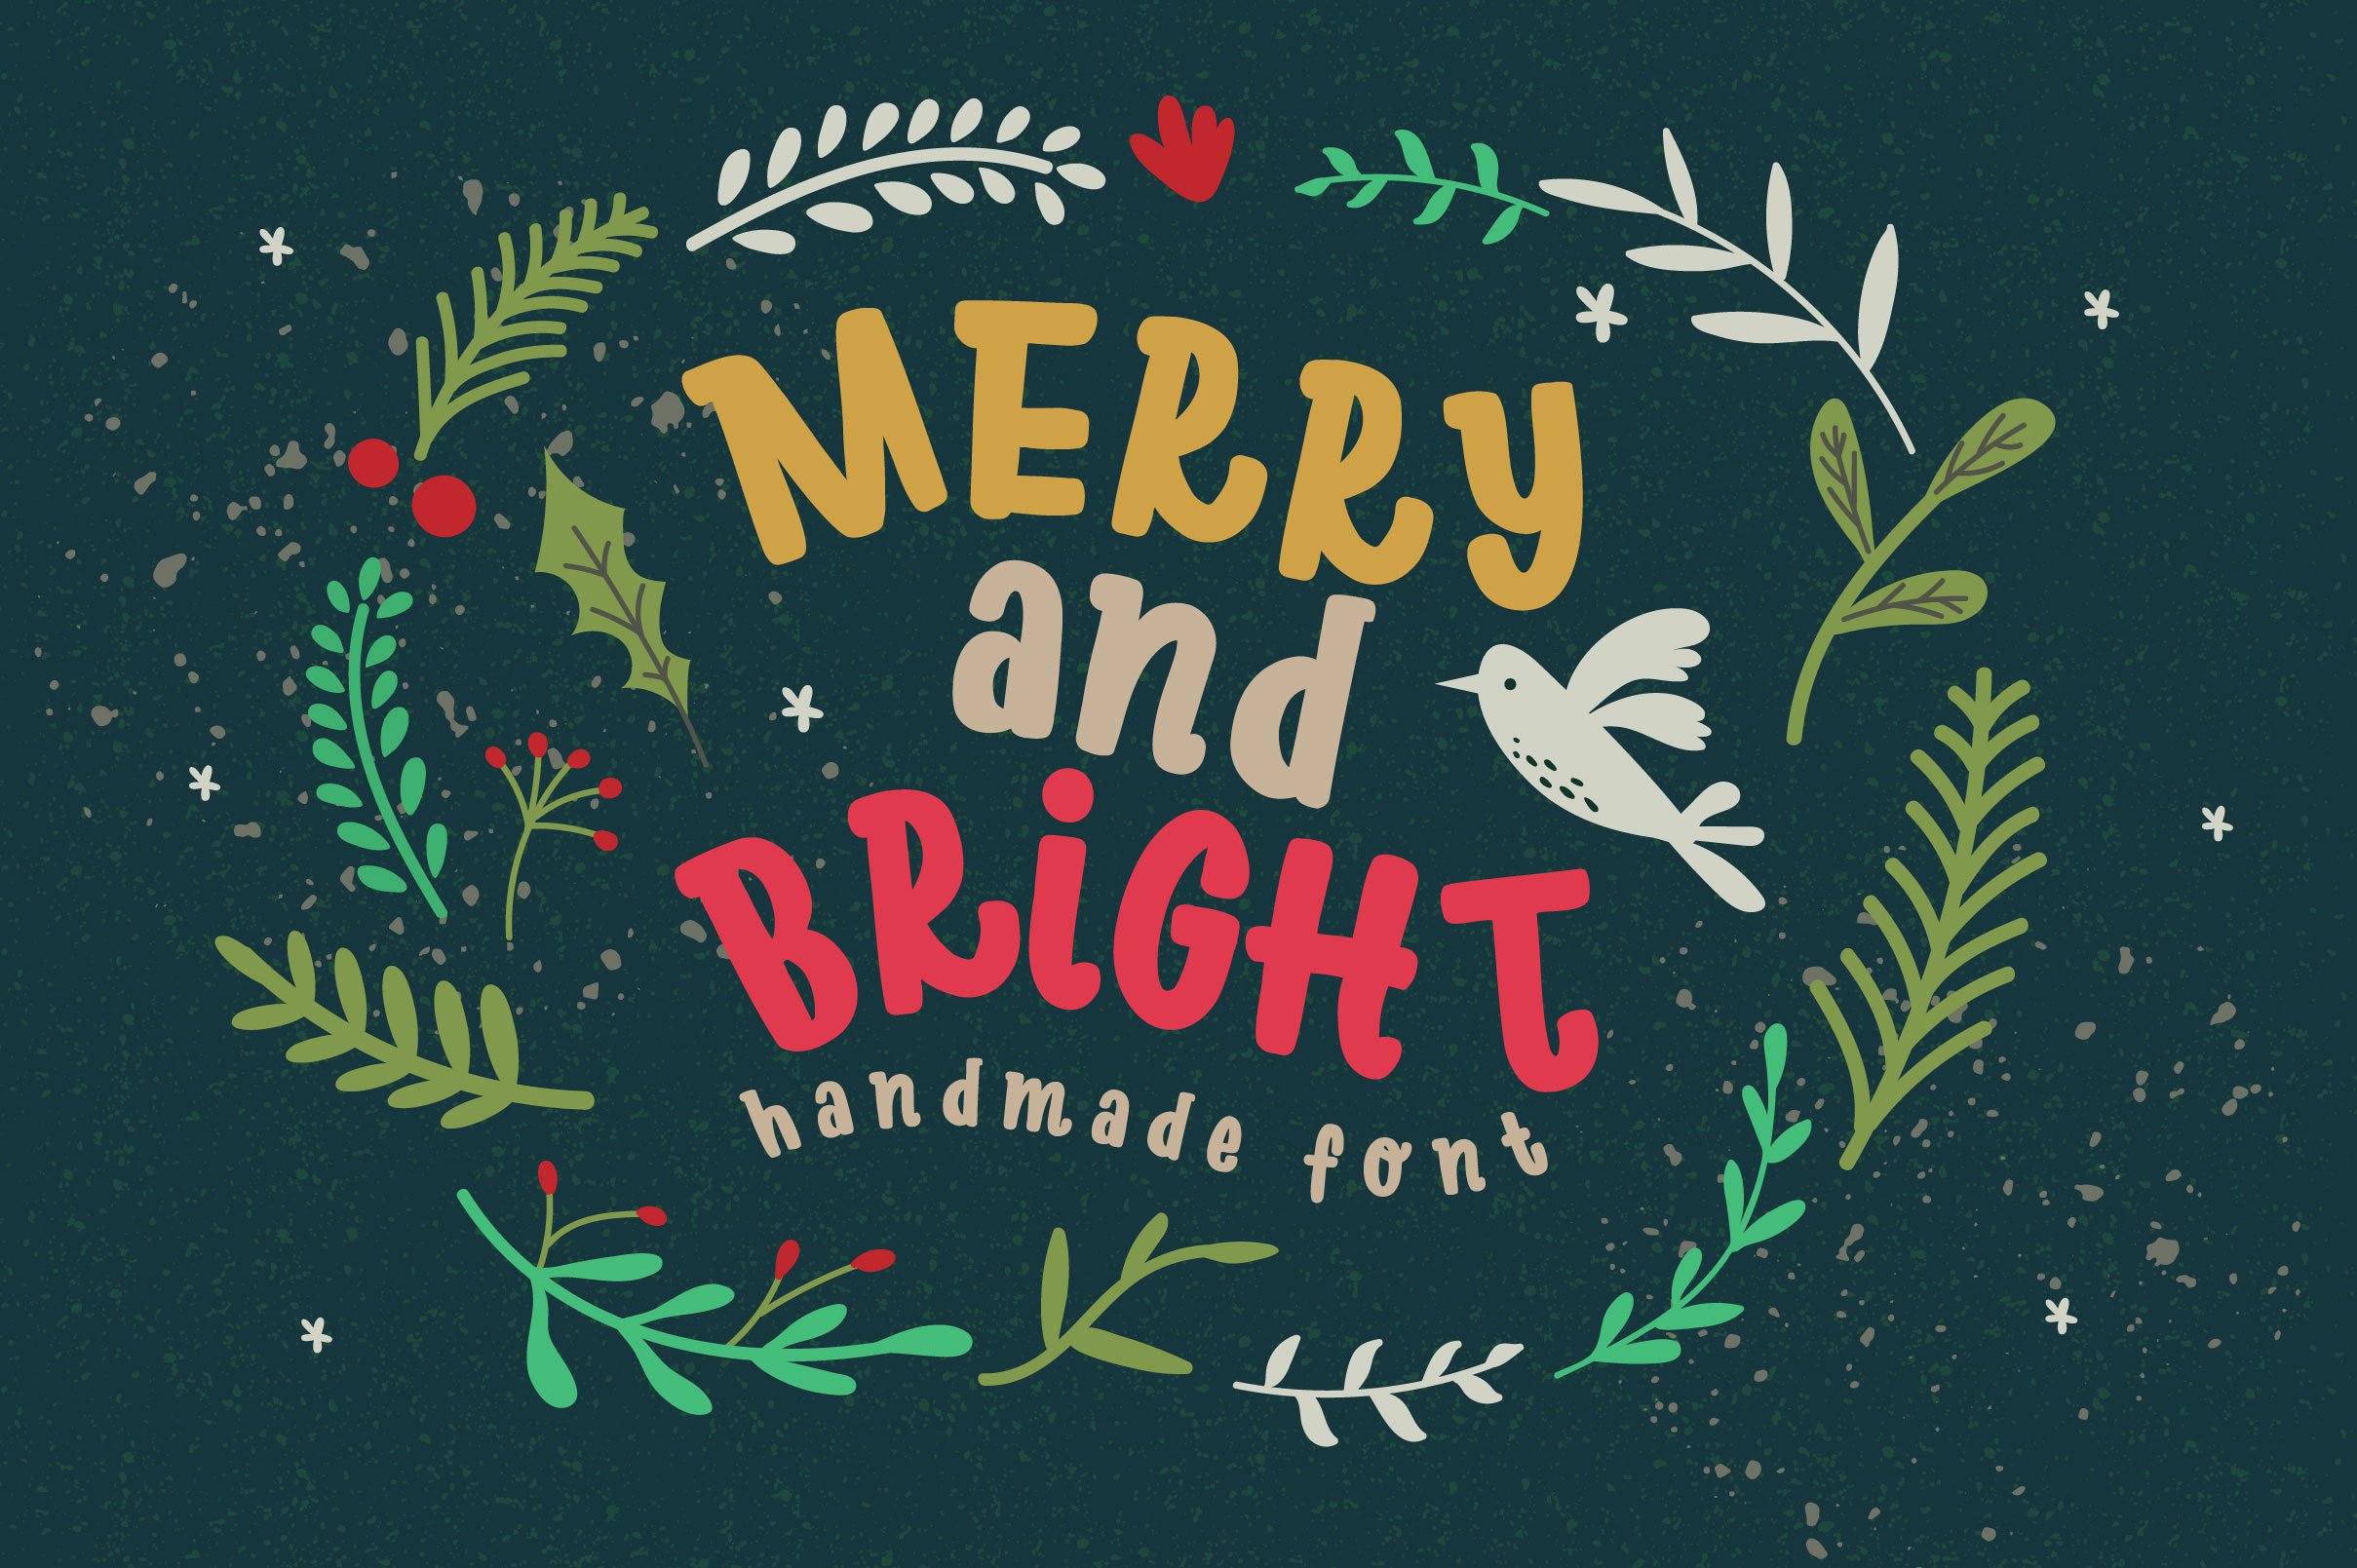 Merry Bright Typeface cover image.